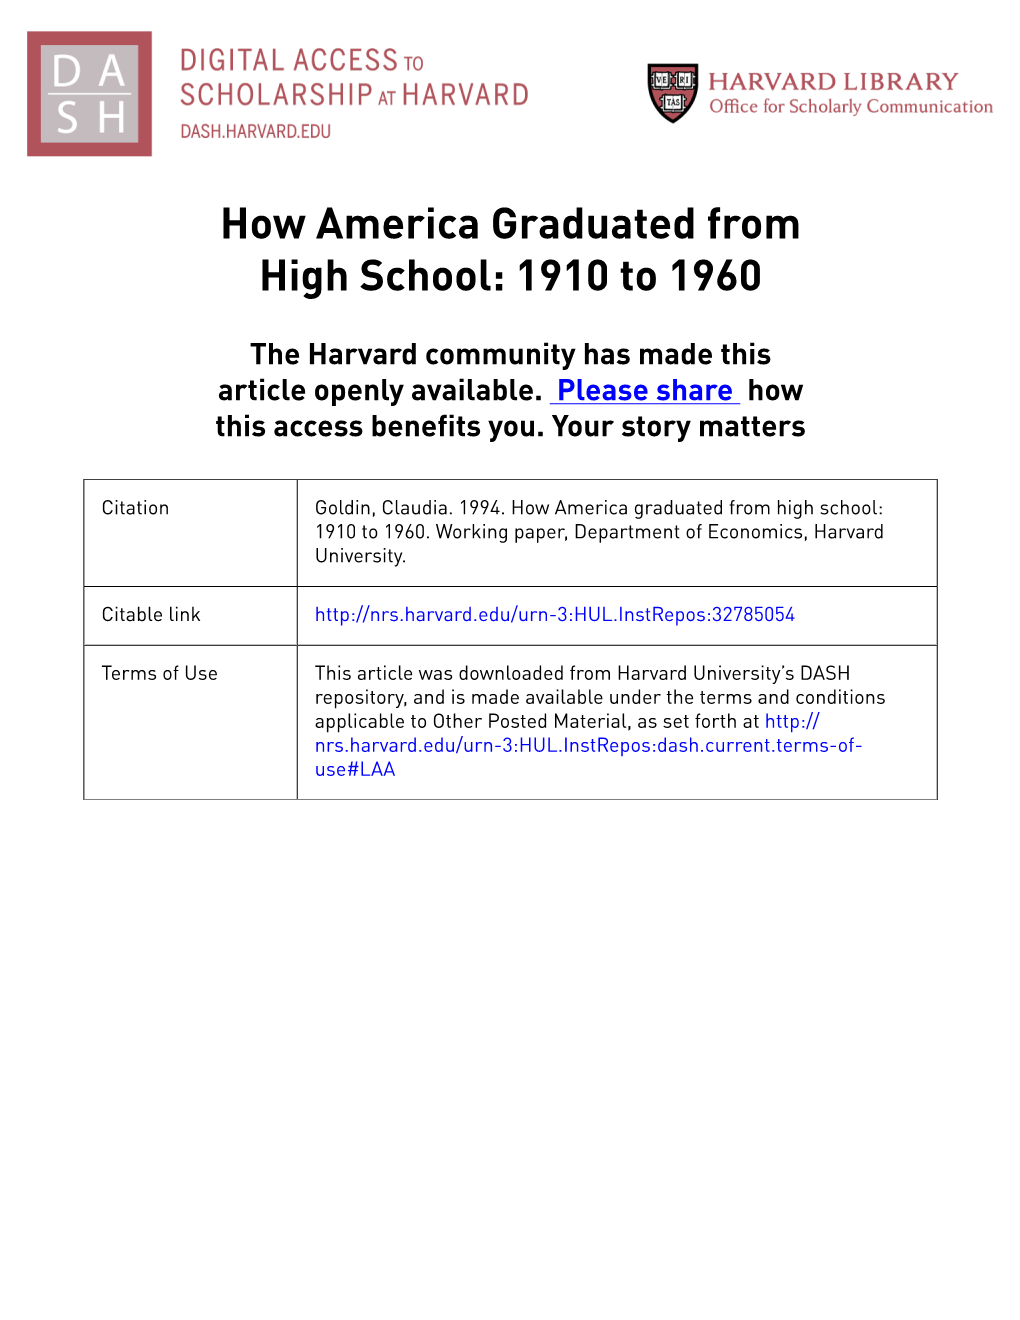 How America Graduated from High School: 1910 to 1960